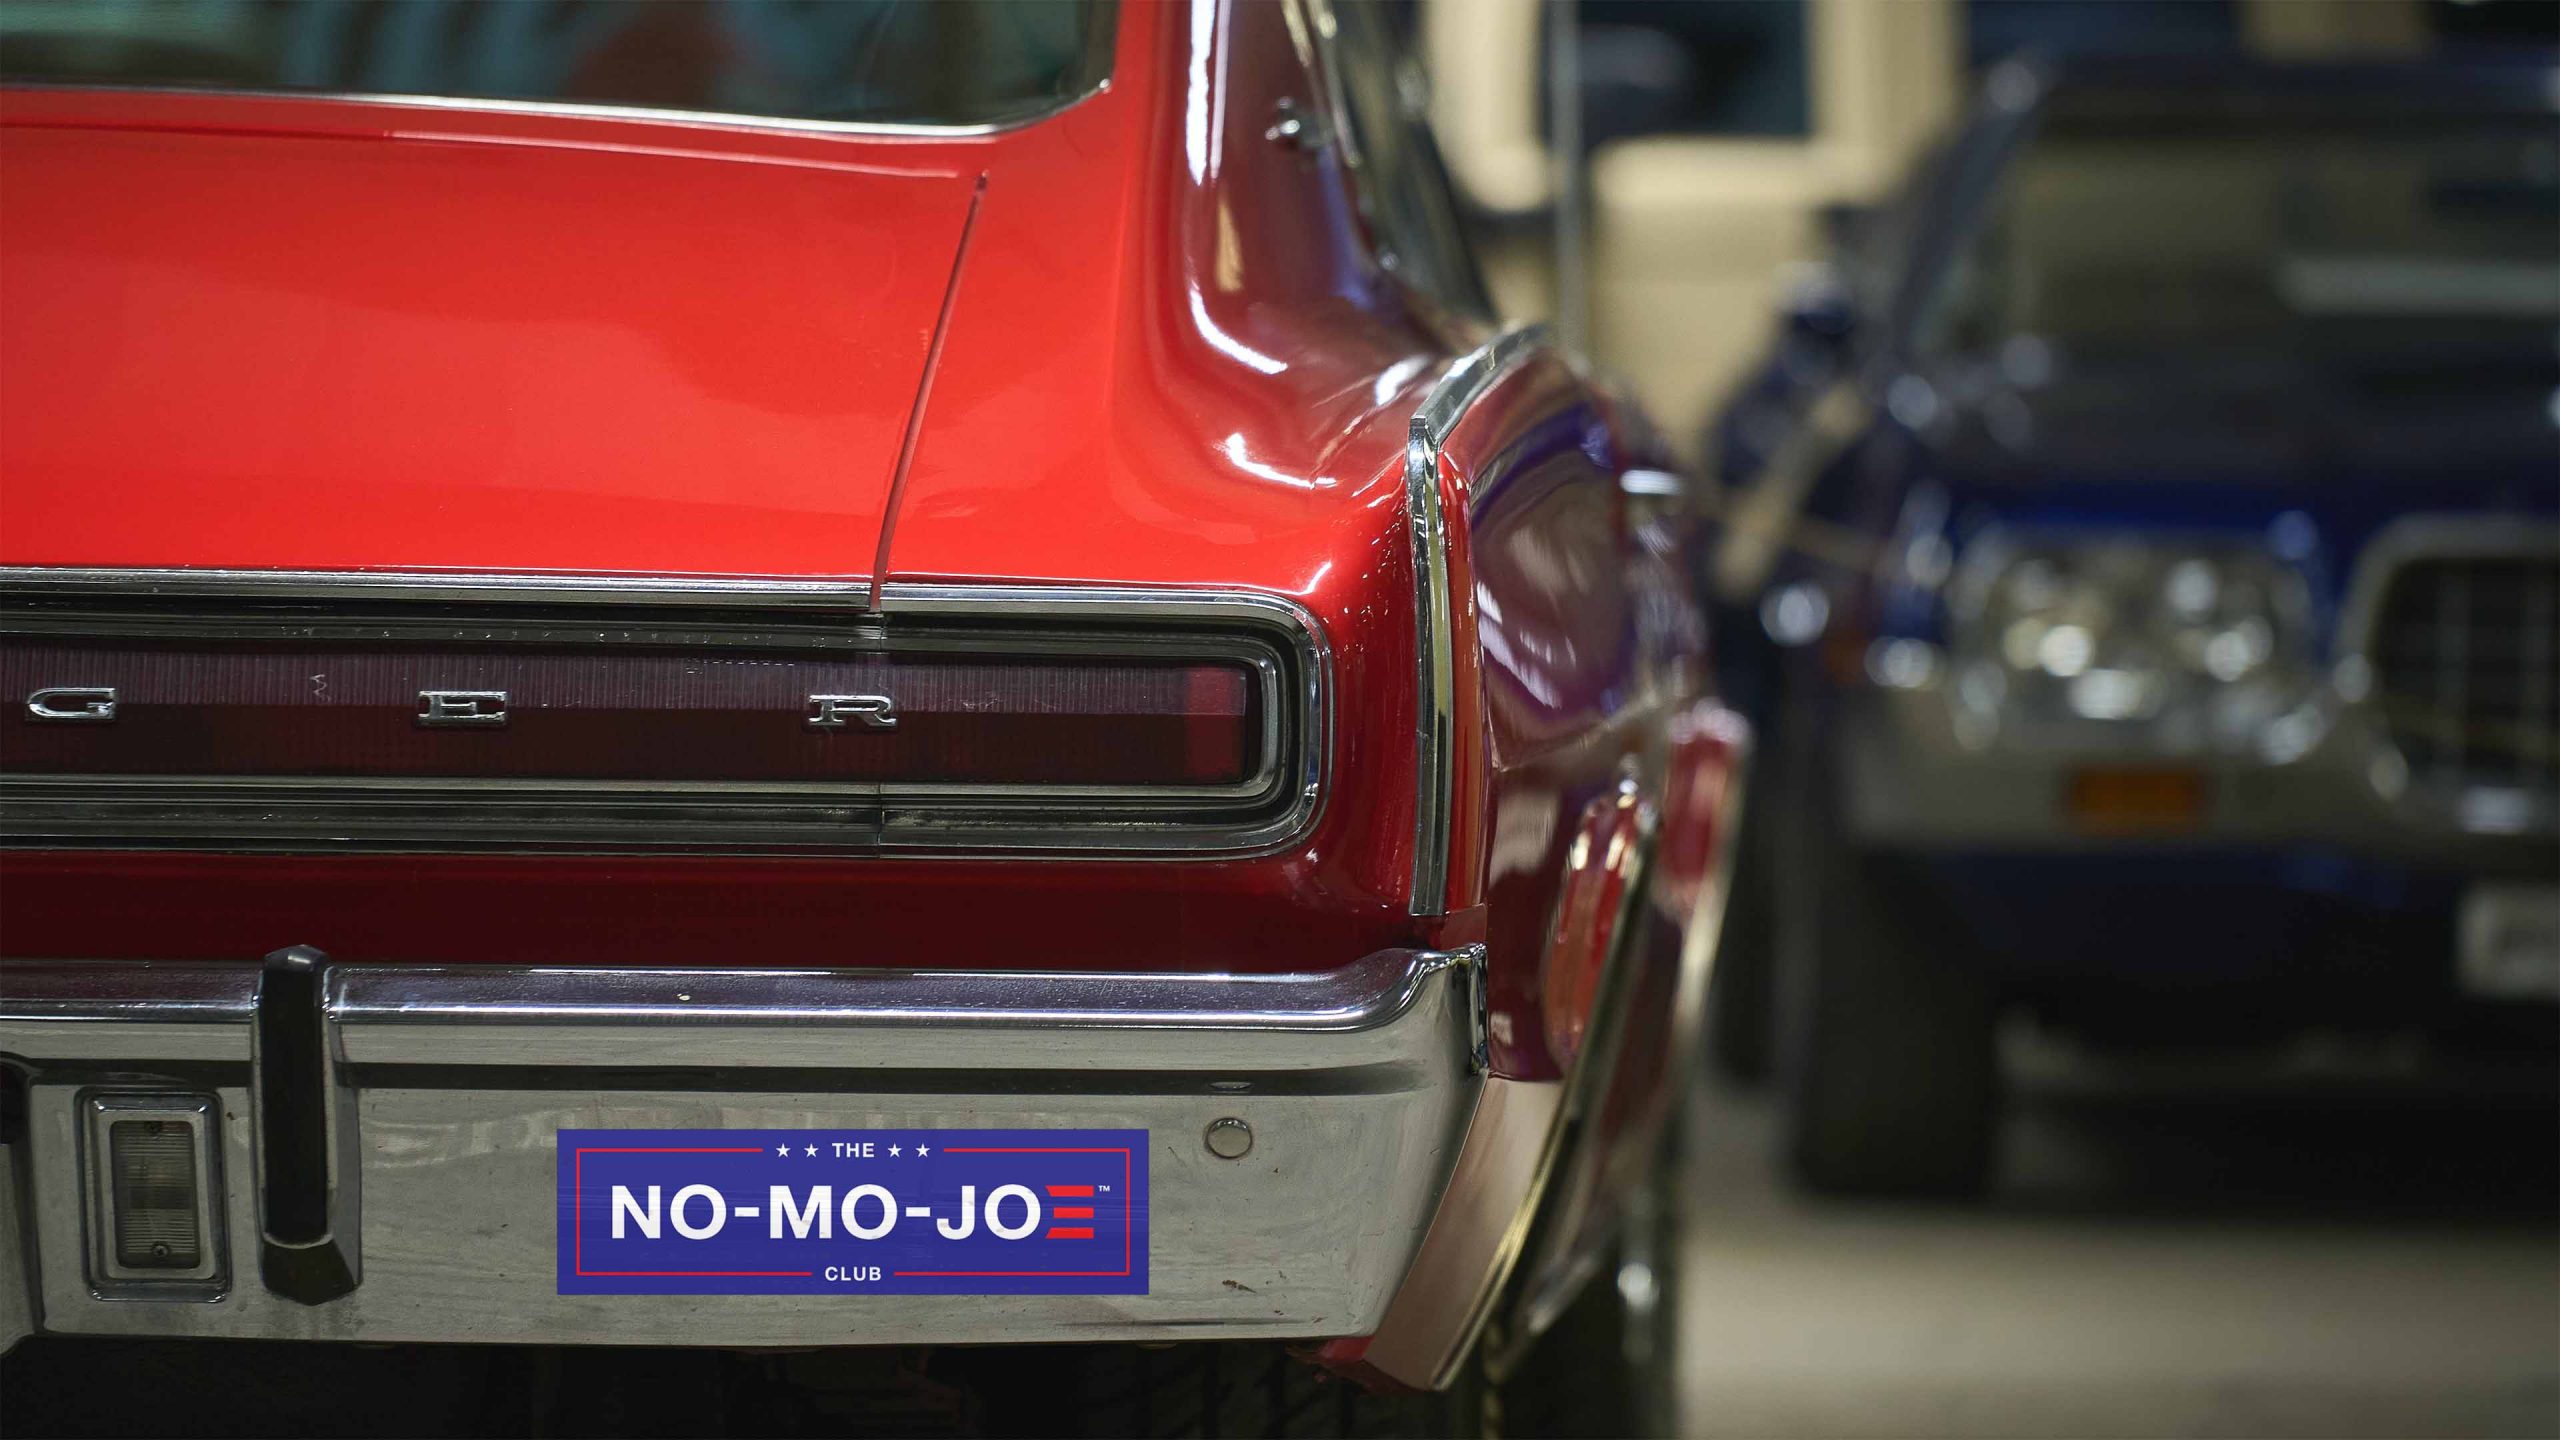 The No-Mo-Joe Club™ bumper sticker on vintage red car parked in garage